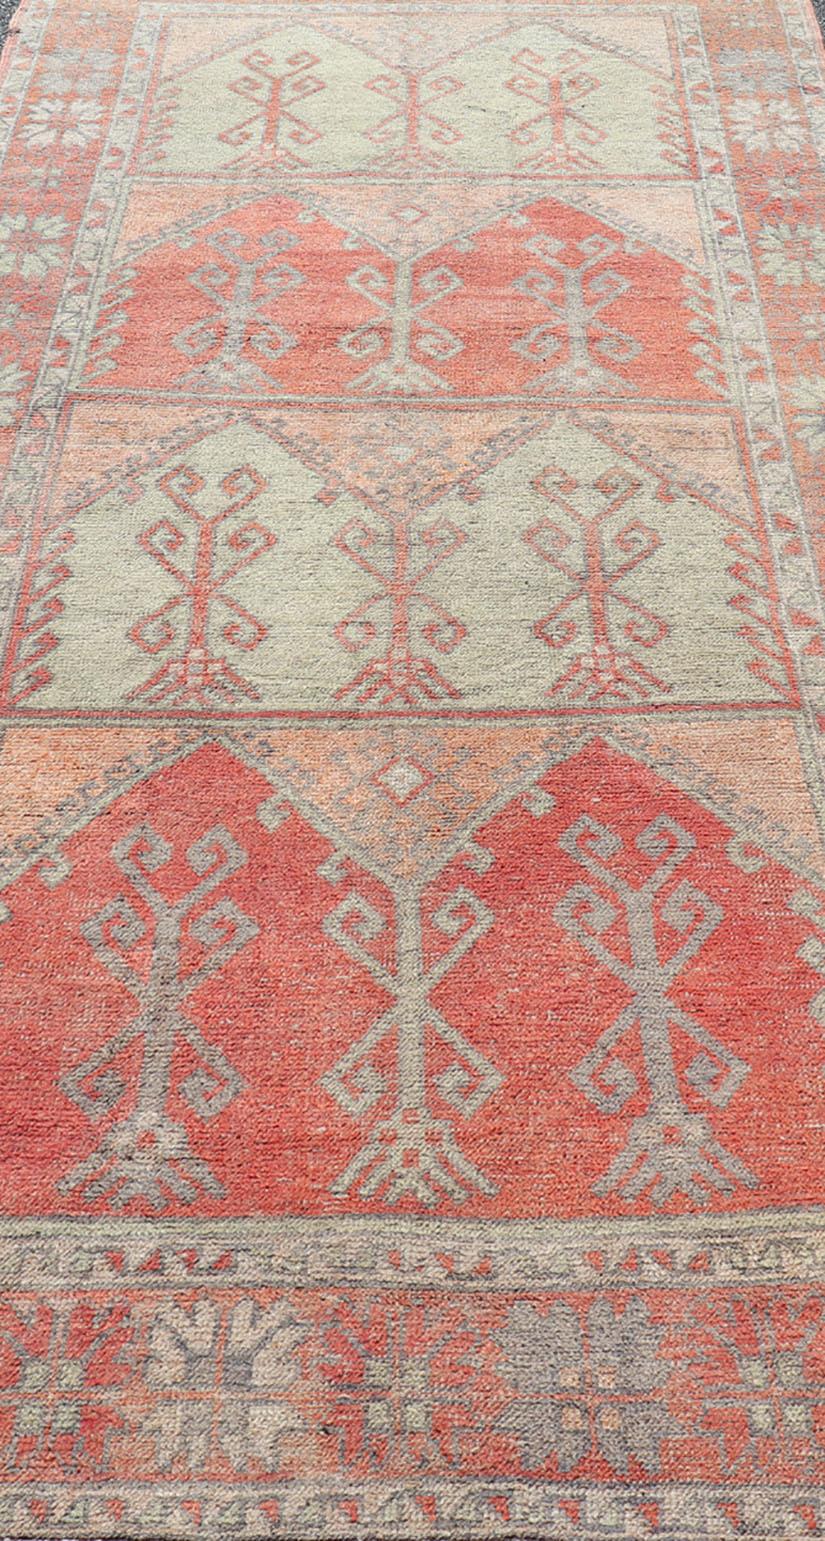 Gallery Rug, Vintage Turkish in Faded Red, Coral, Orange, Soft Pink and Green For Sale 3